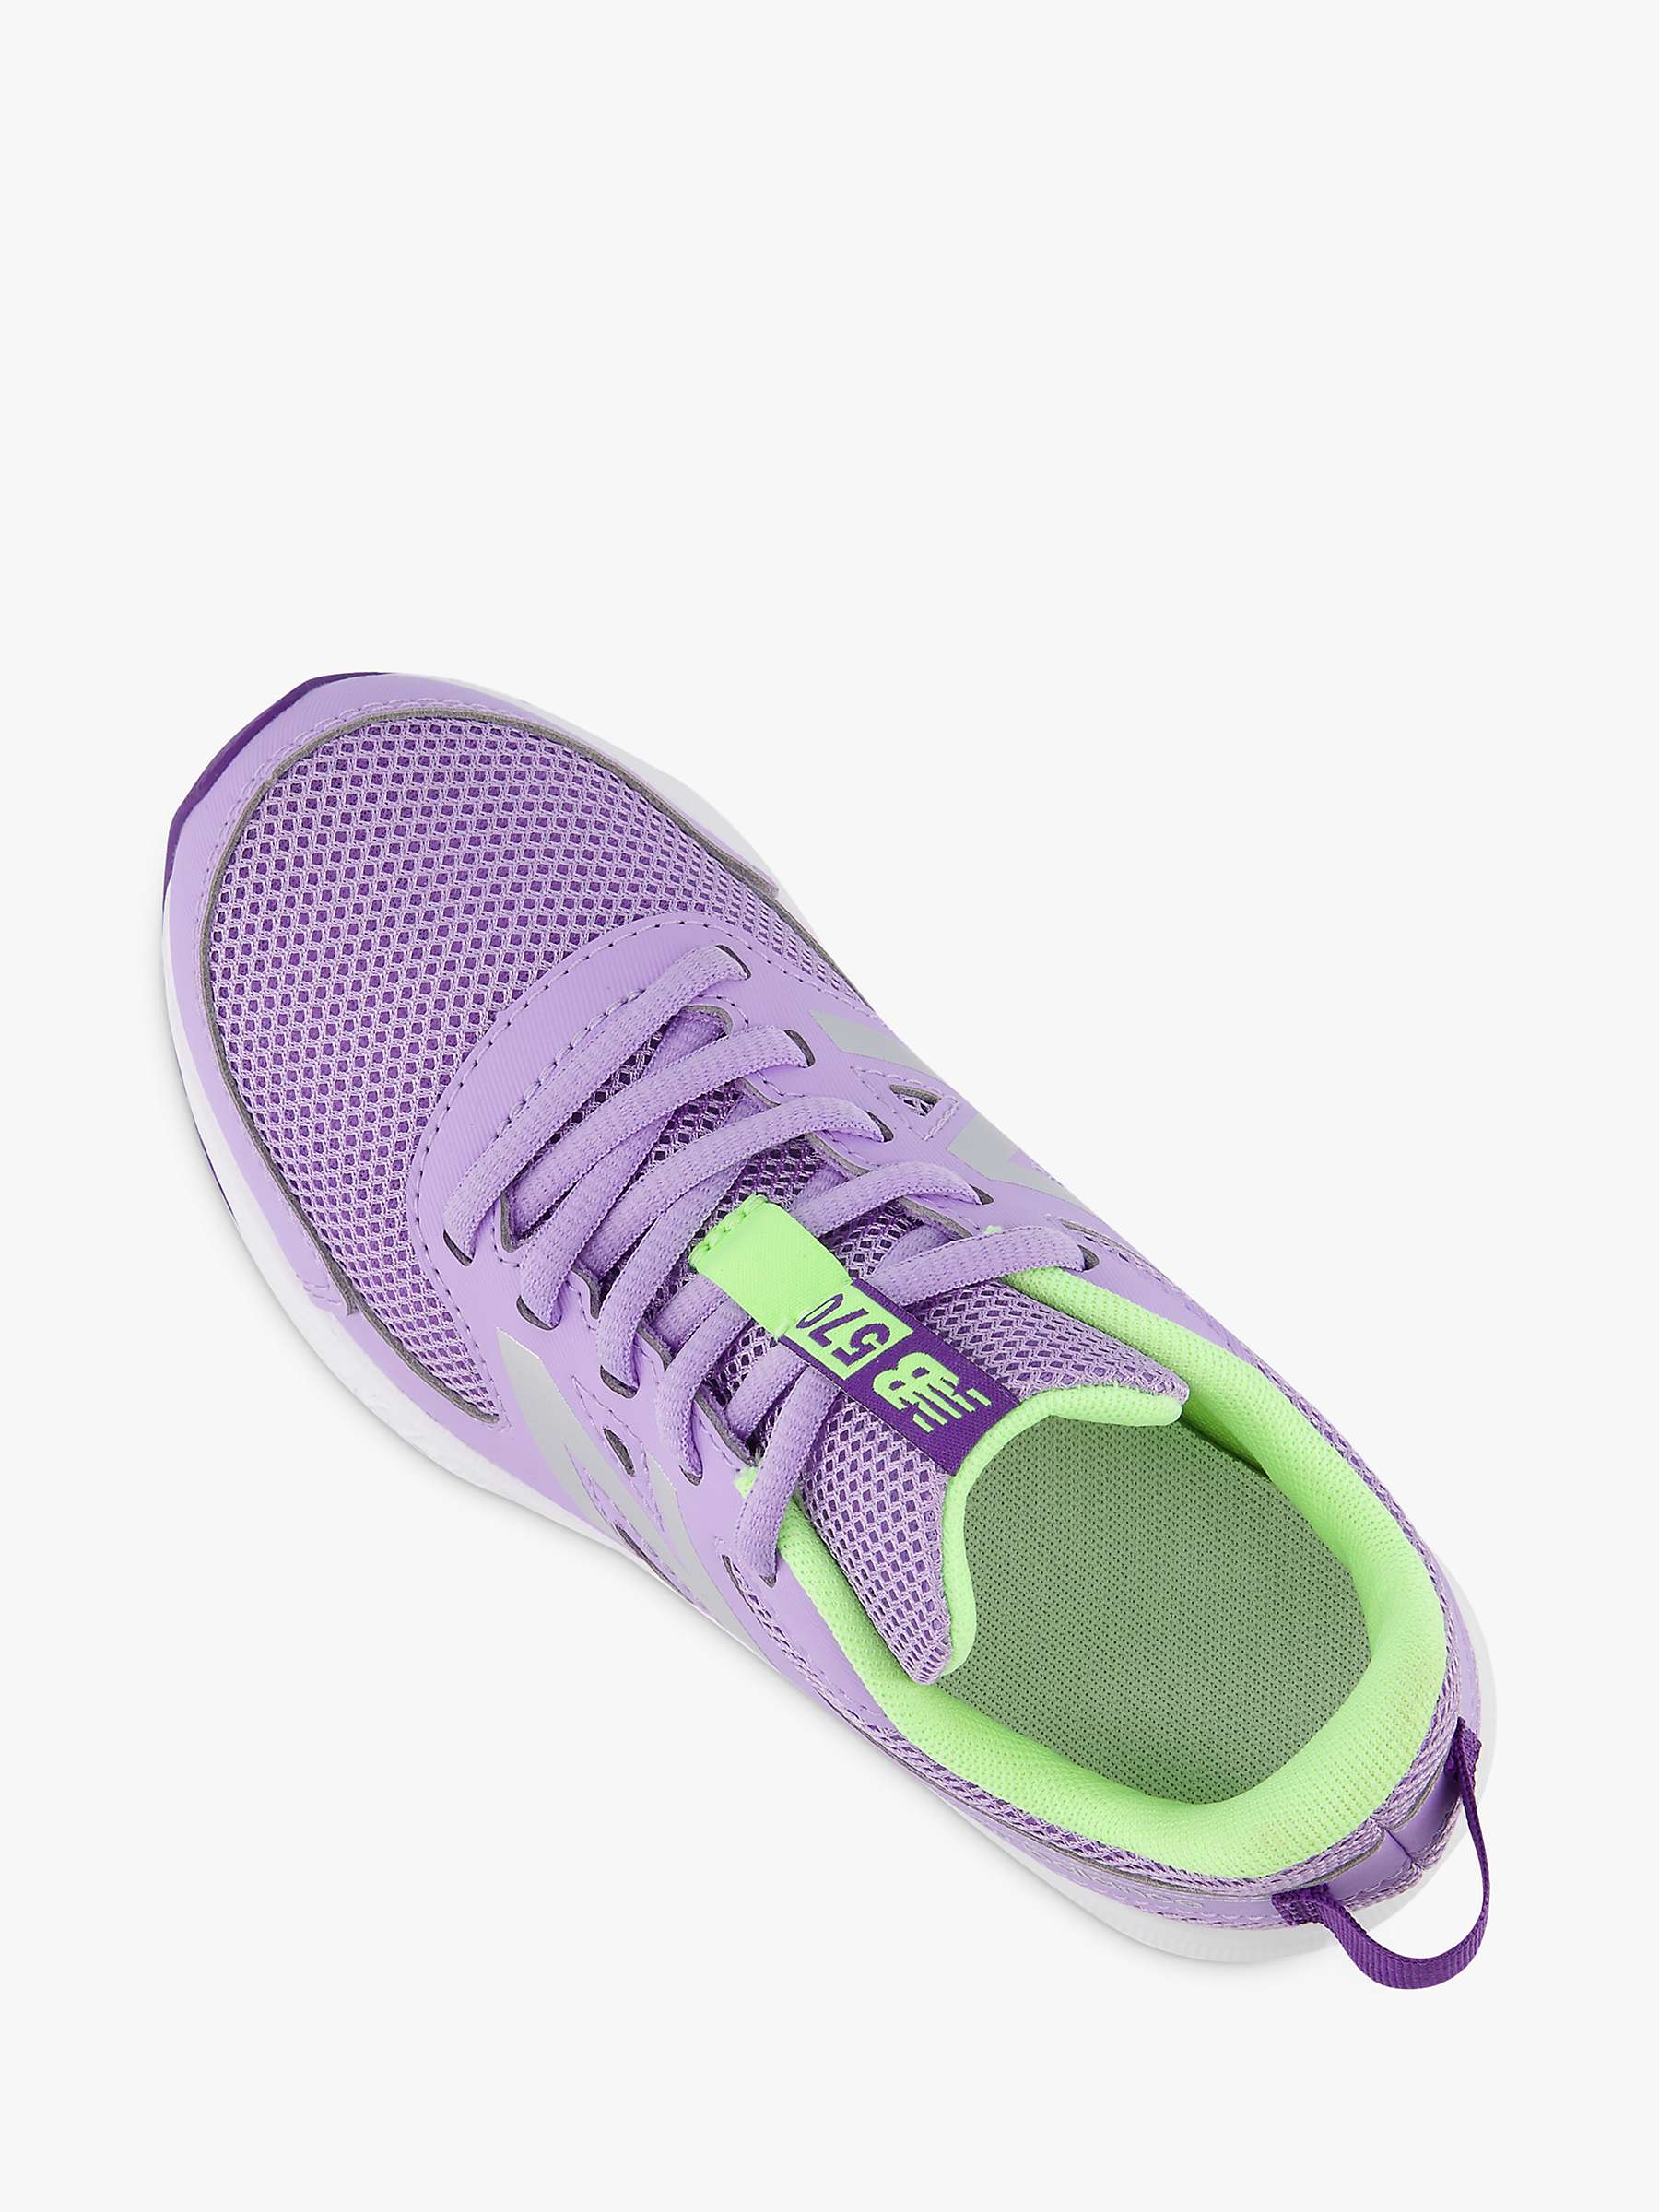 Buy New Balance Kids' 570v3 Lace-Up Trainers, Lilac Online at johnlewis.com